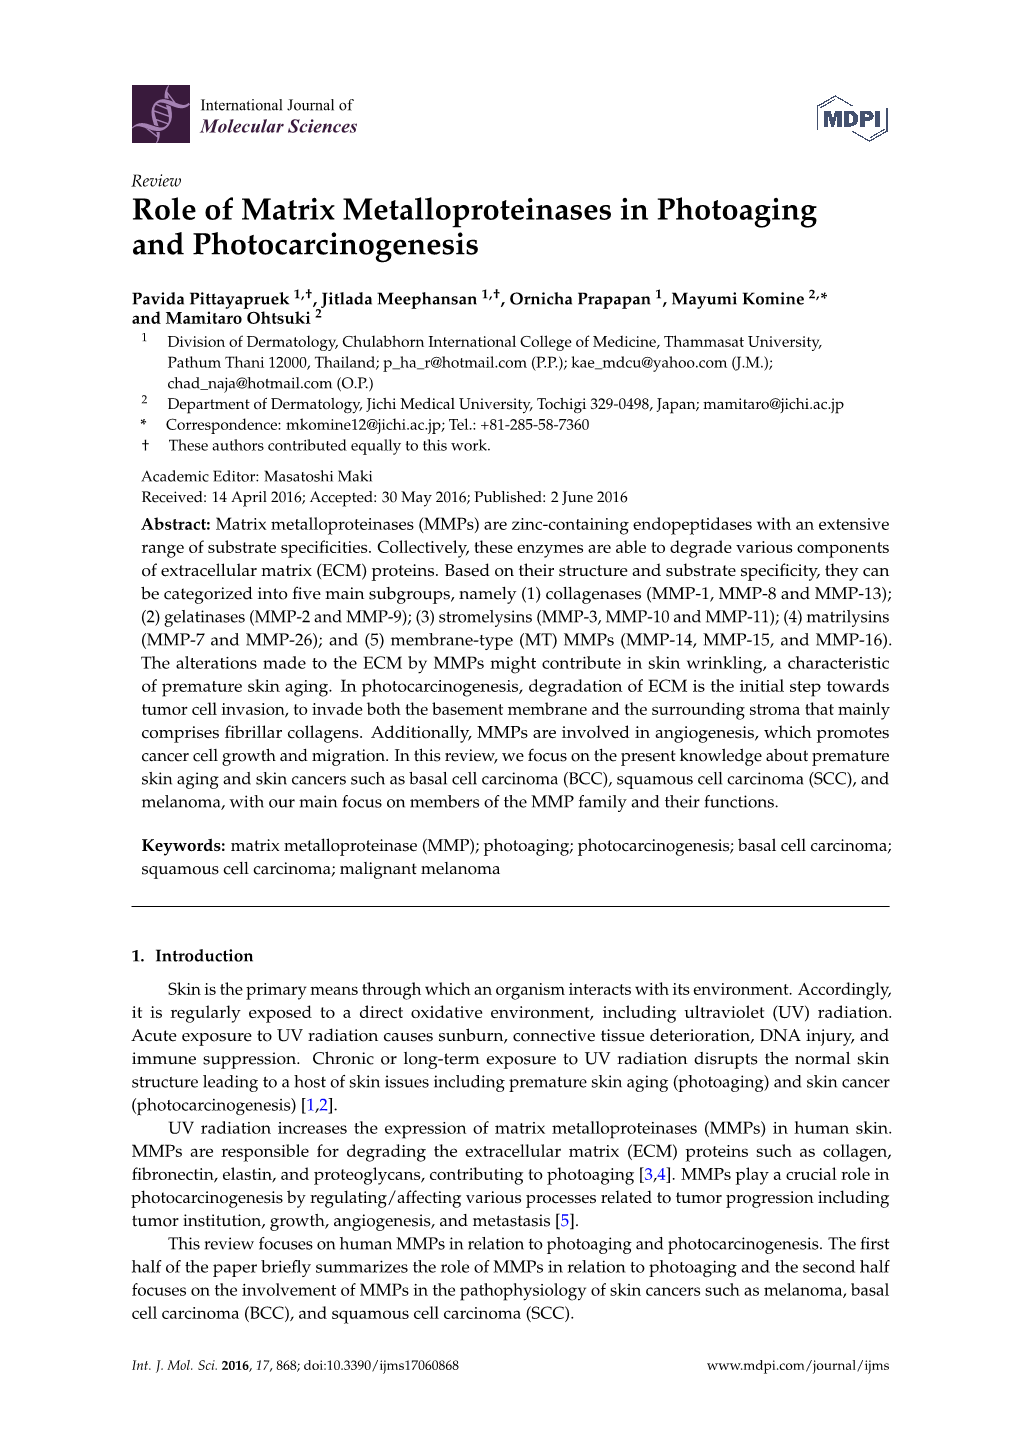 Role of Matrix Metalloproteinases in Photoaging and Photocarcinogenesis